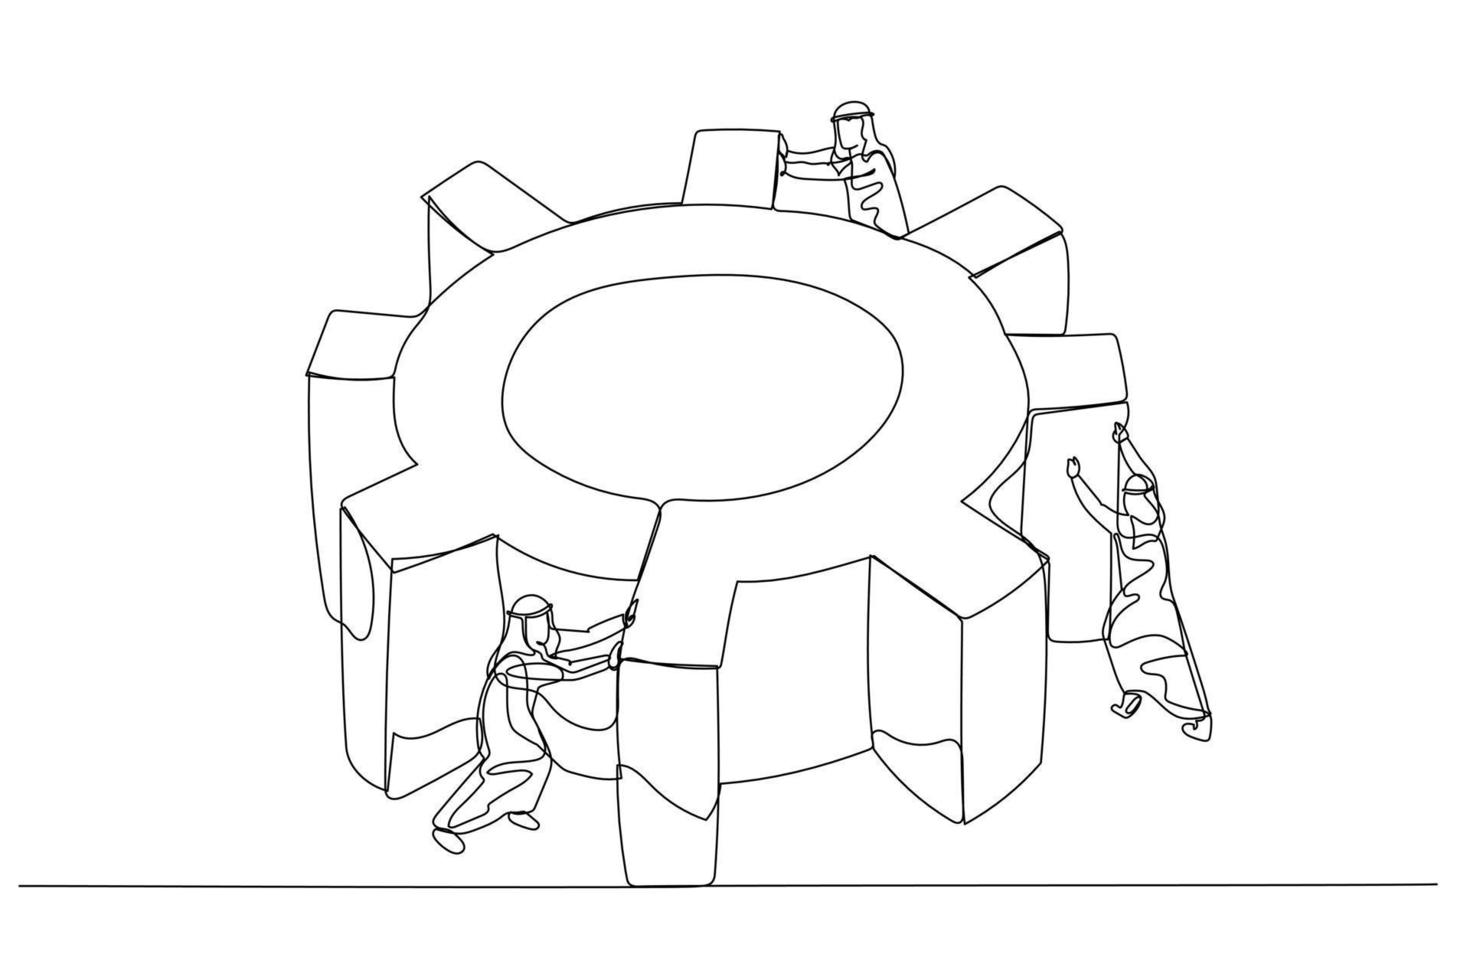 Illustration of arab man spinning cogwheel gear together with team concept of hard work team. Single continuous line art style vector